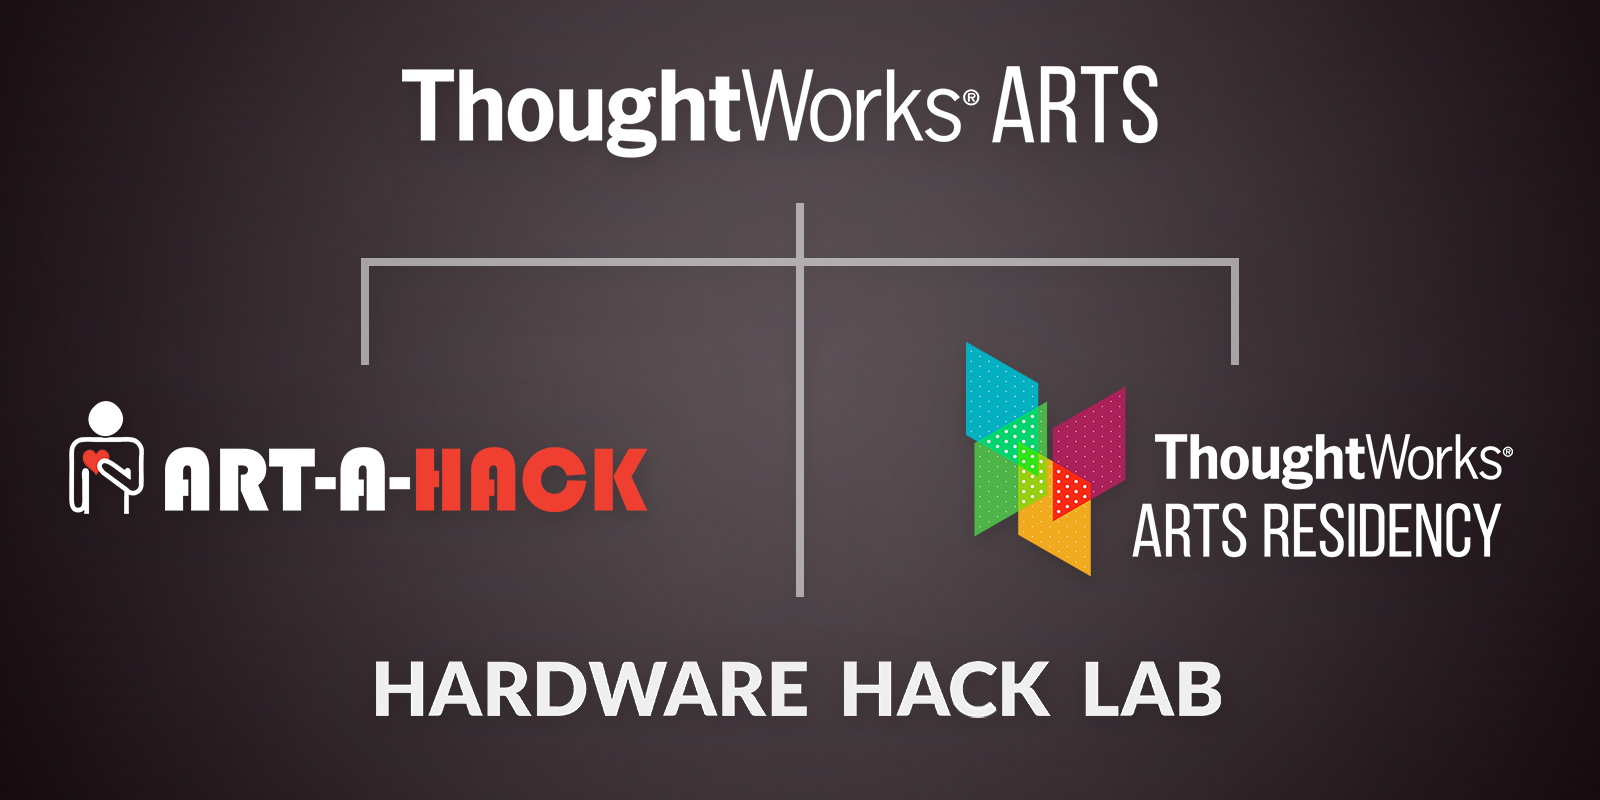 Logos for Thoughtworks Art and subprograms Hardware Hack Lab, Art-A-Hack and Arts Residency